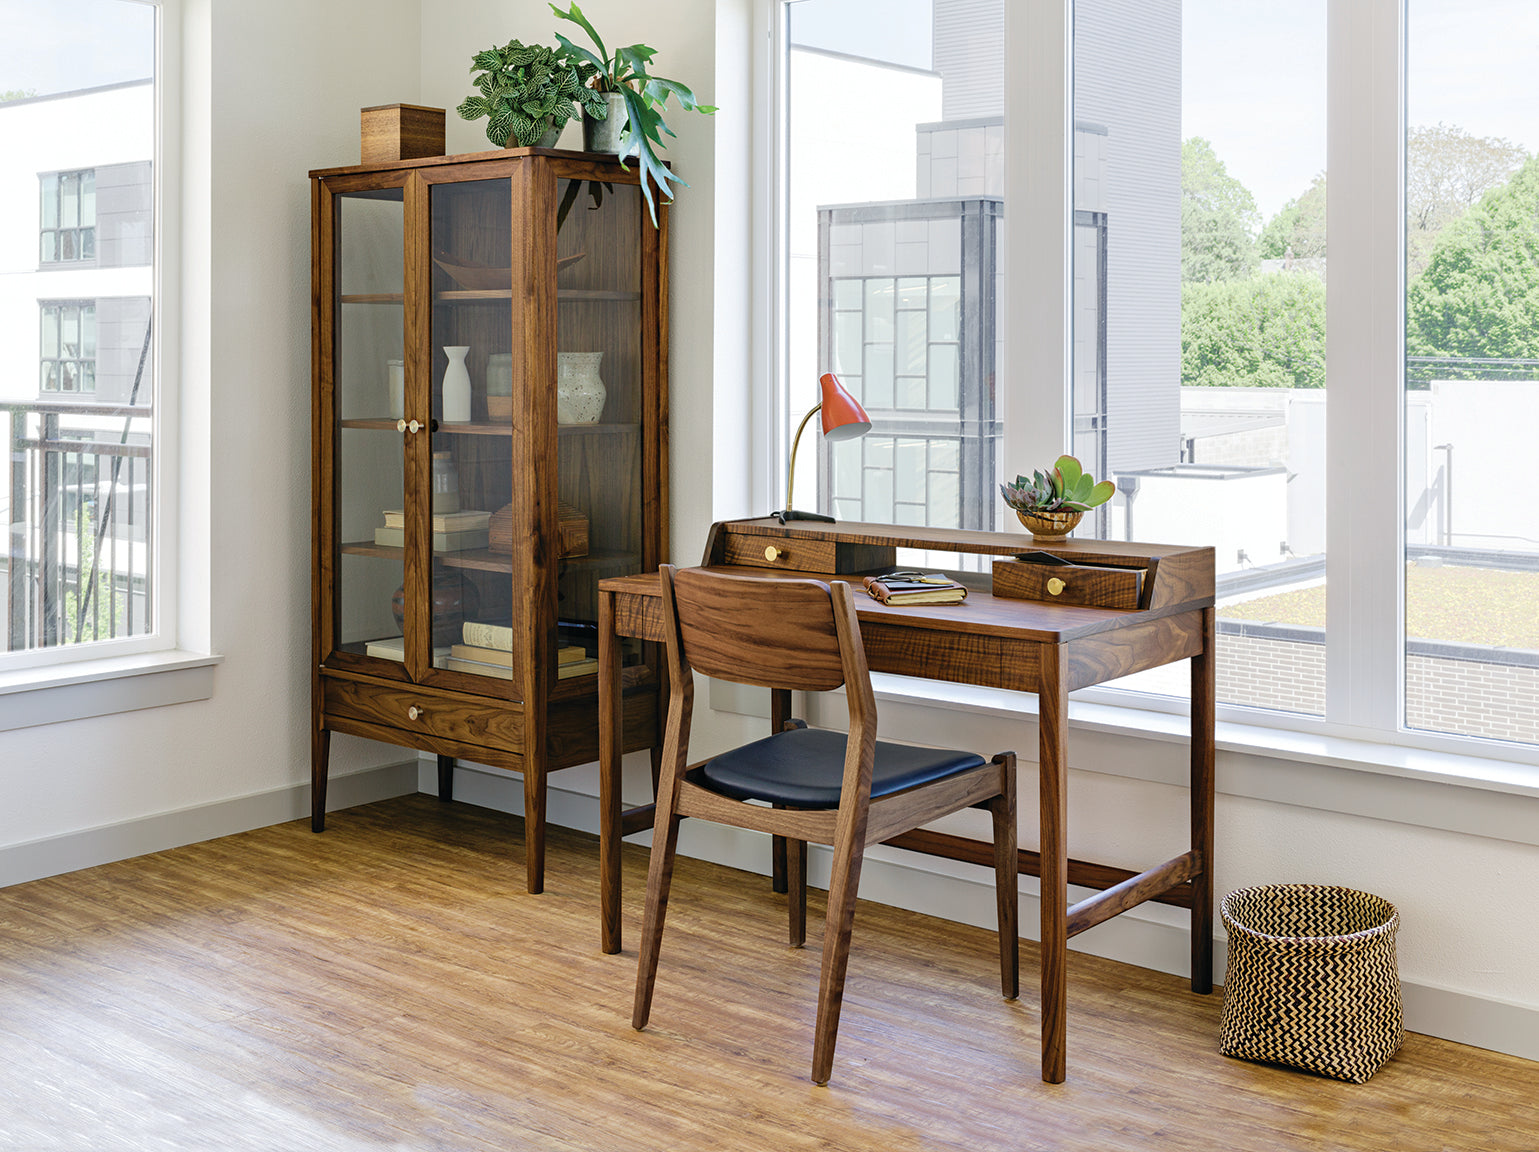 Whitman Curio in Eastern Walnut with Maud Desk and Whitman Chair